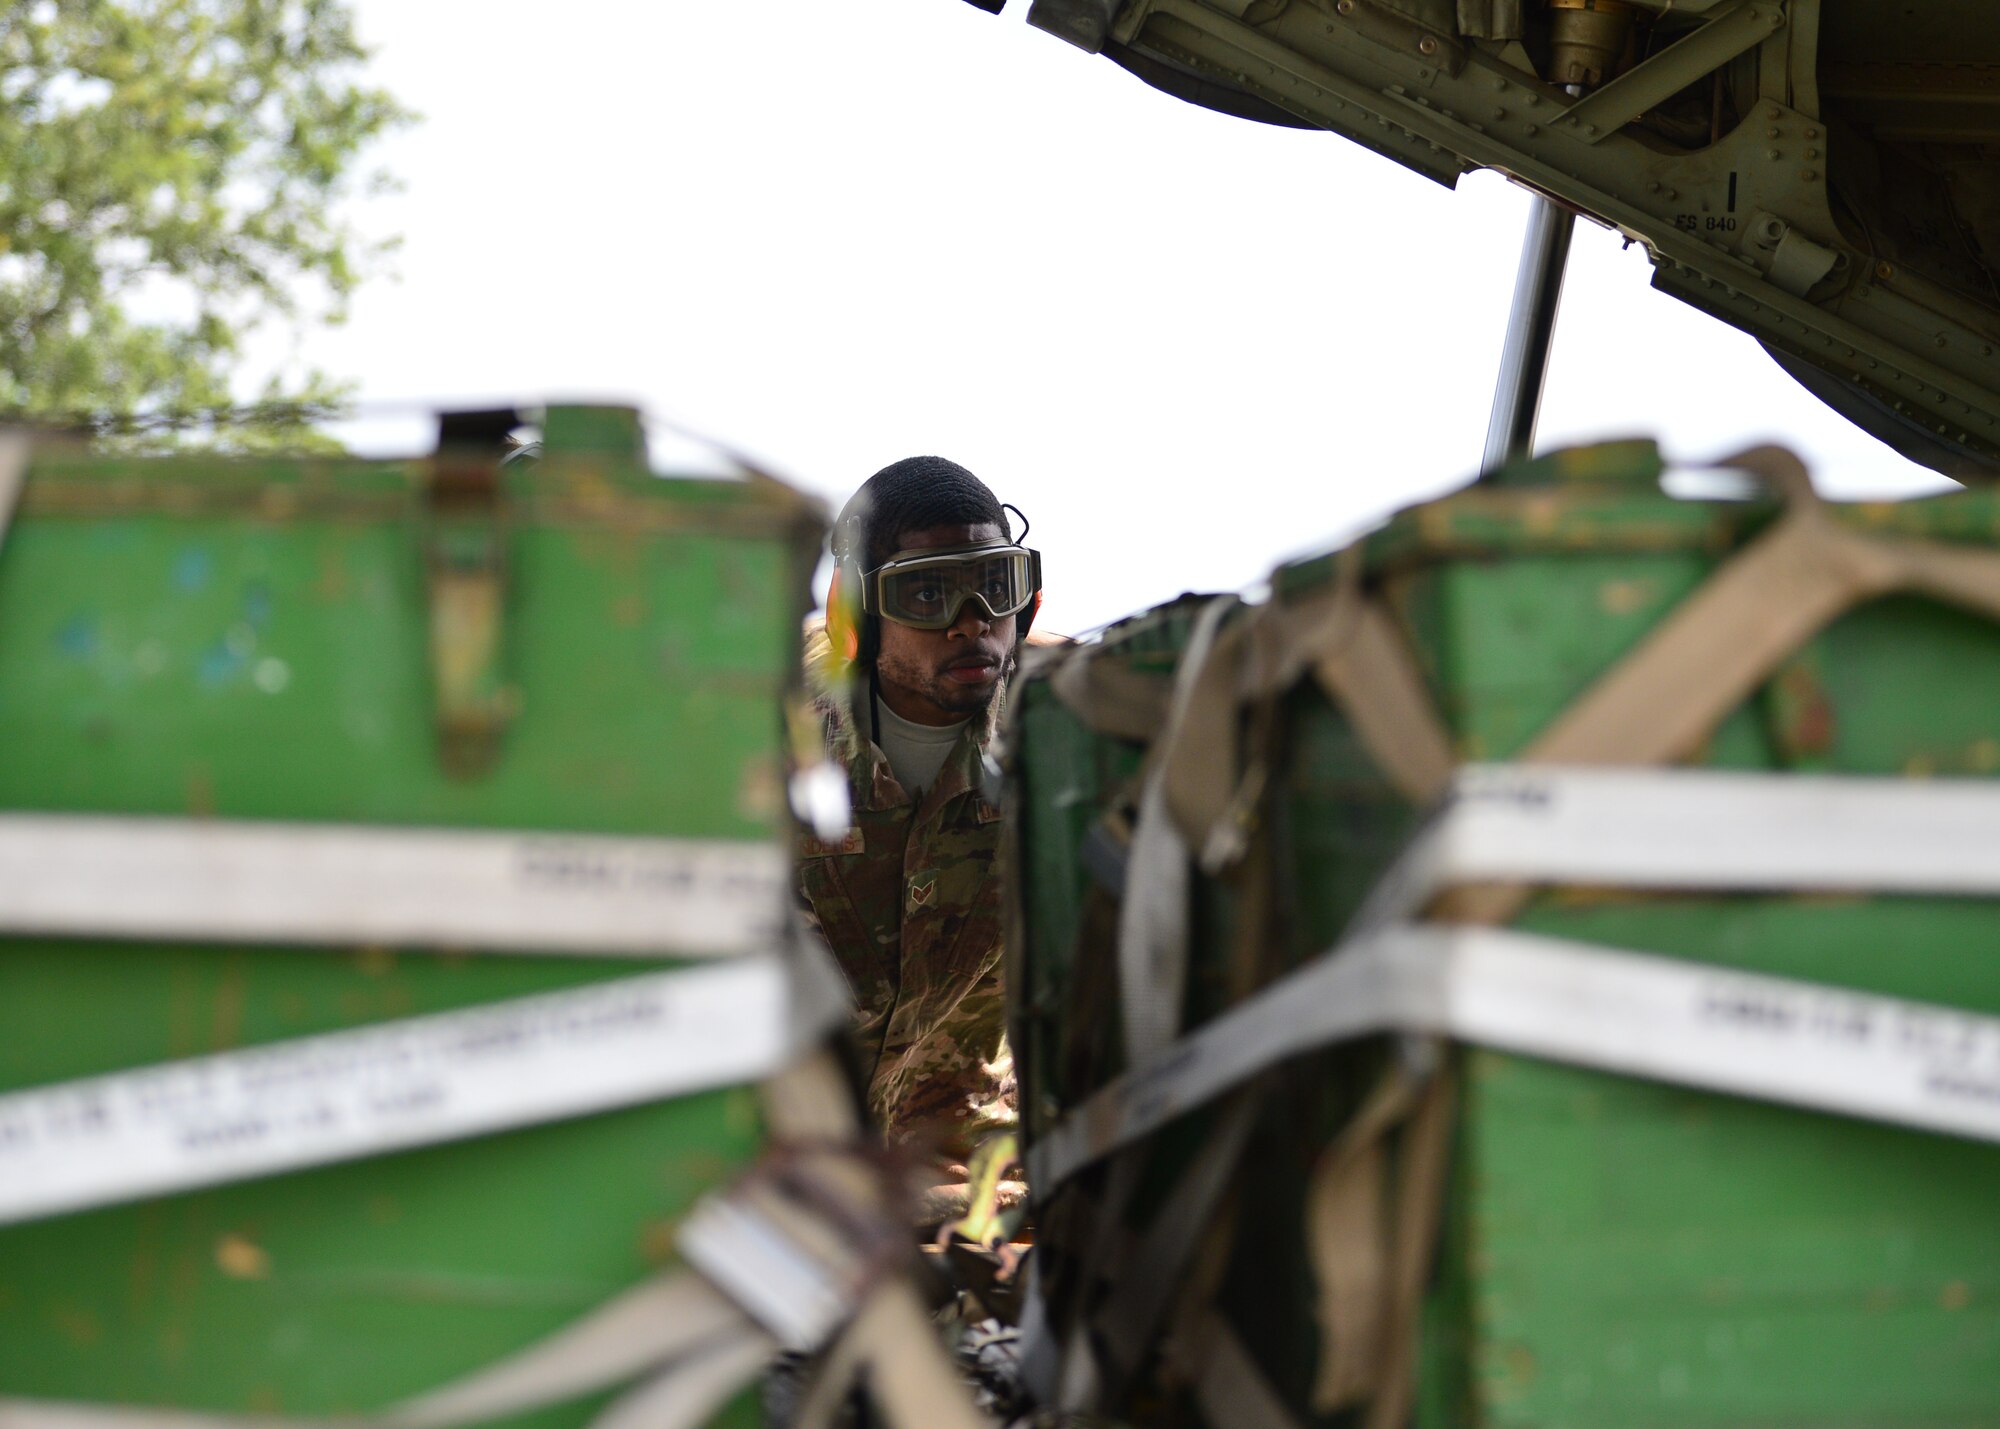 U.S. Air Force Senior Airman Kenneth Saunders, 435th Contingency Response Squadron mobile aerial porter, examines a pallet at Powidz Air Base, Poland, July 13, 2019. As a mobile aerial porter, Saunders assisted in teaching new processes and techniques to his Polish counterparts during Aviation Rotation 19-3. (U.S. Air Force photo by Staff Sgt. Jimmie D. Pike)